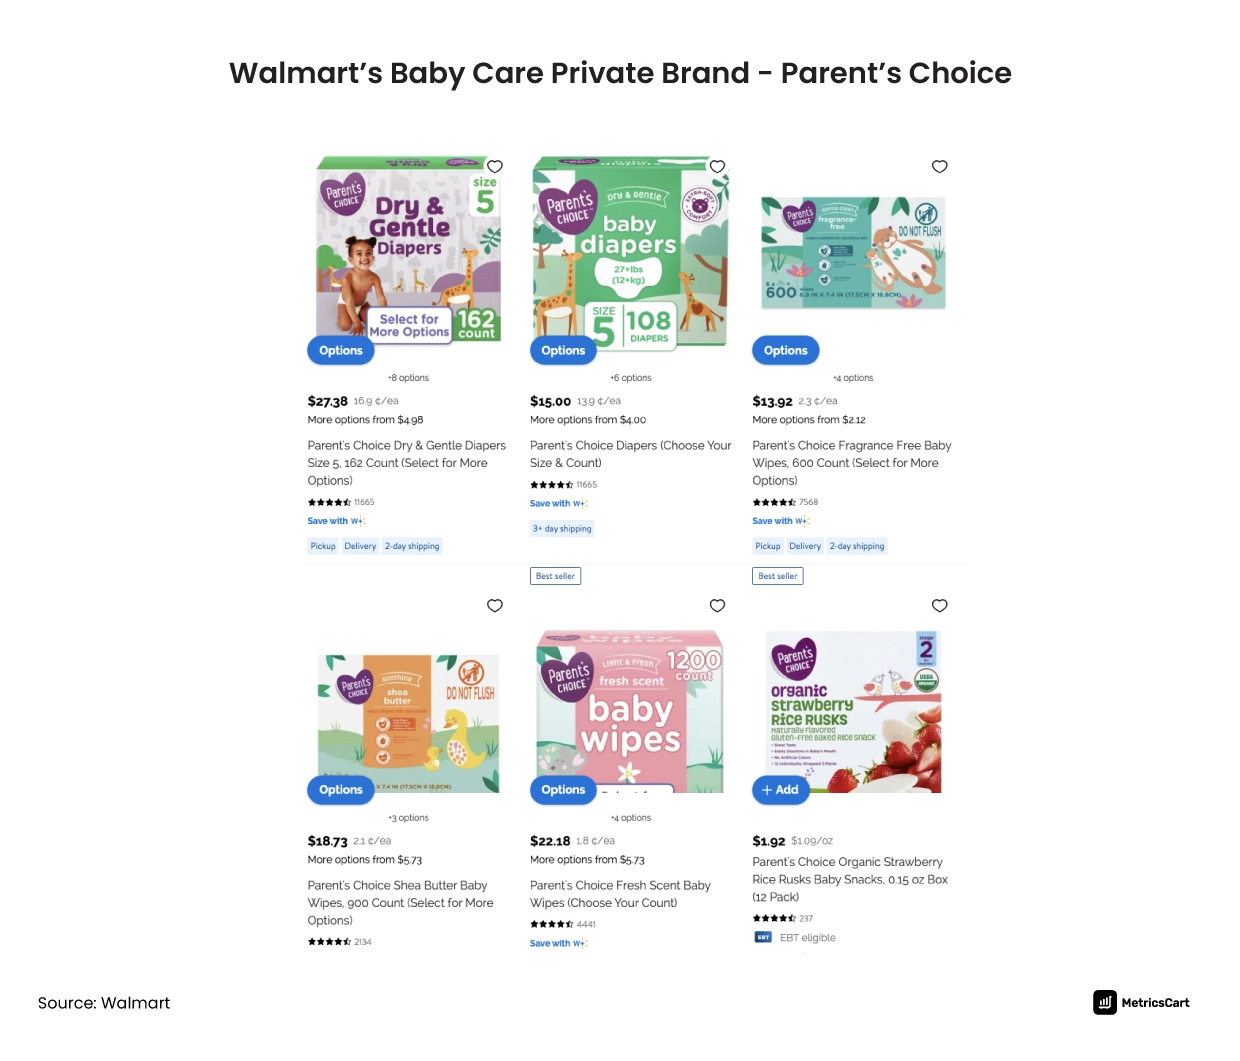 Walmart’s Baby Care Private Label Brand - Parent’s Choice